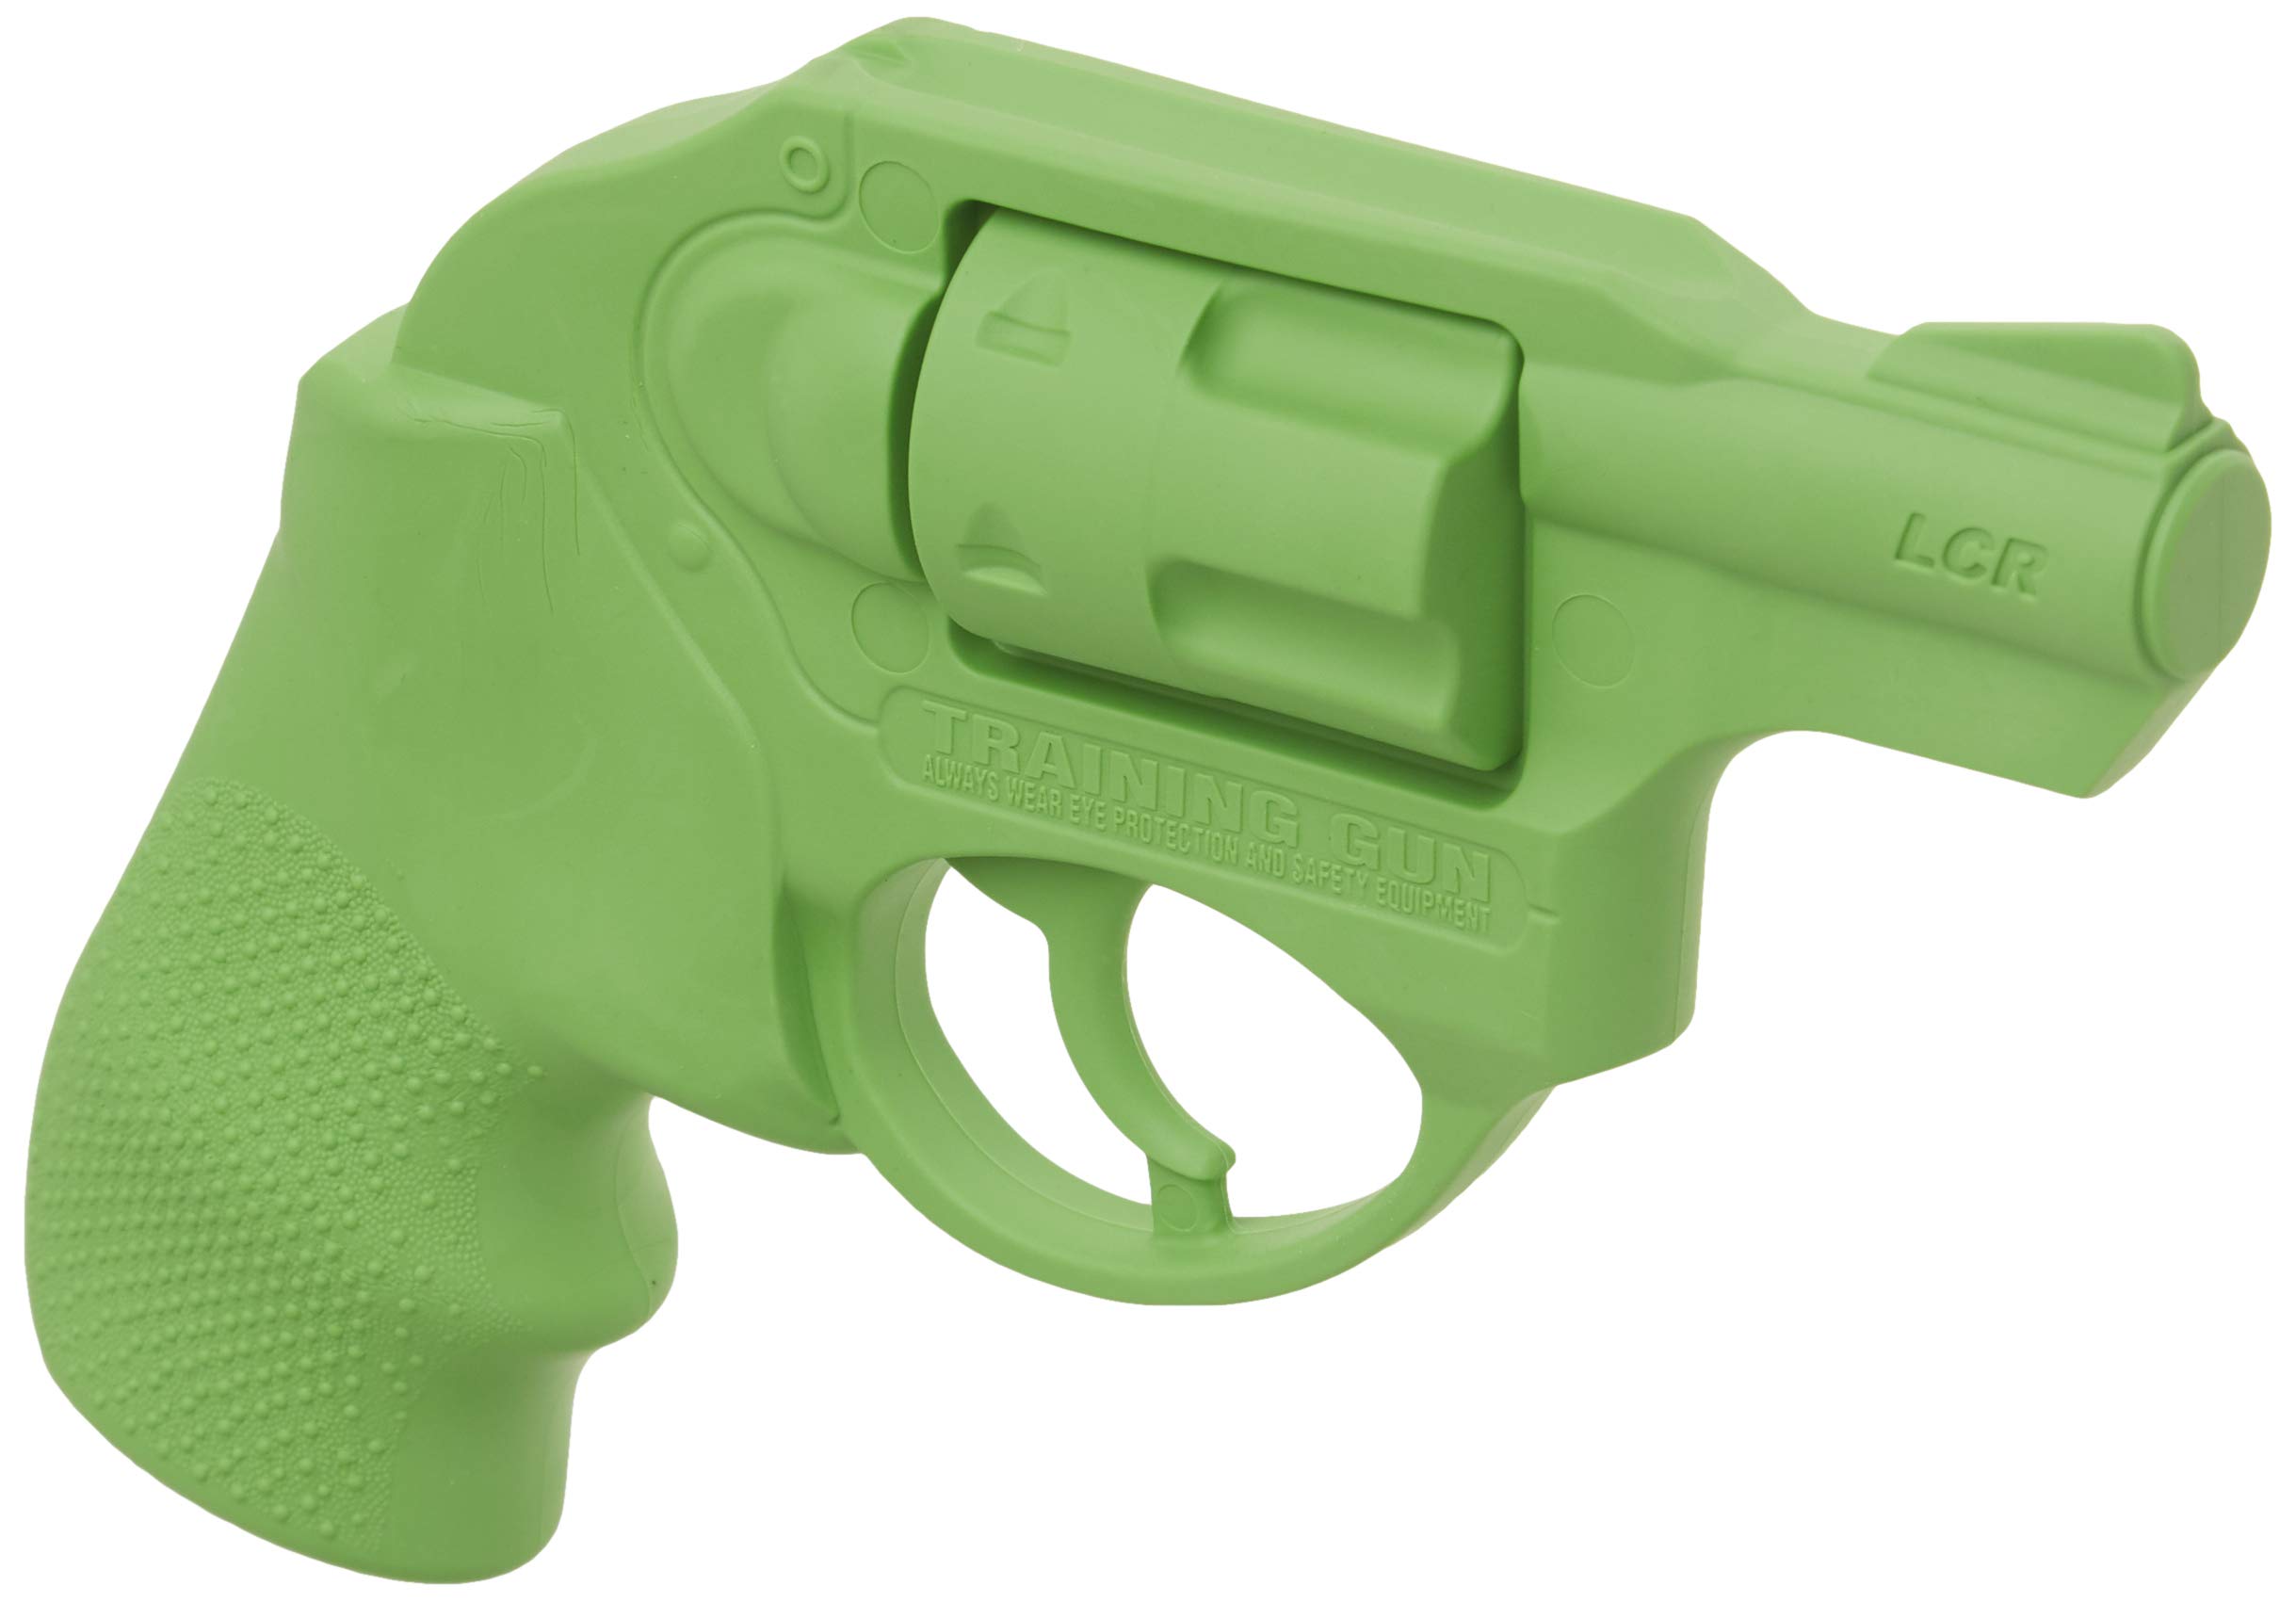 Cold Steel (92RGRL) Ruger LCR Rubber Training Revolver, Green